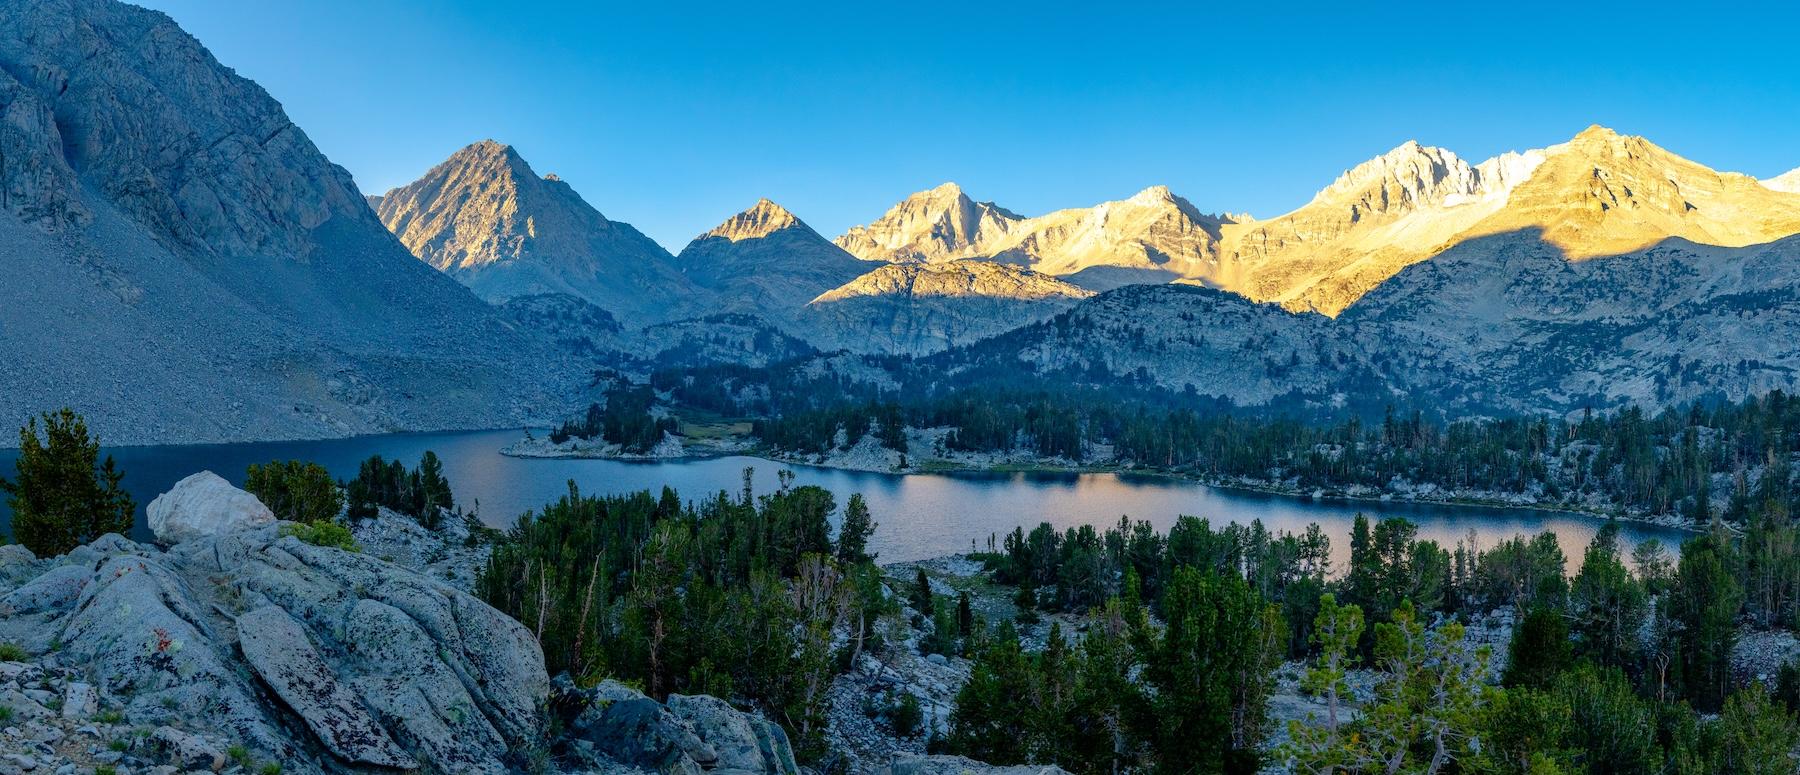 Panorama of a sunrise at Chickenfoot Lake in The Little Lakes Valley of the Sierras